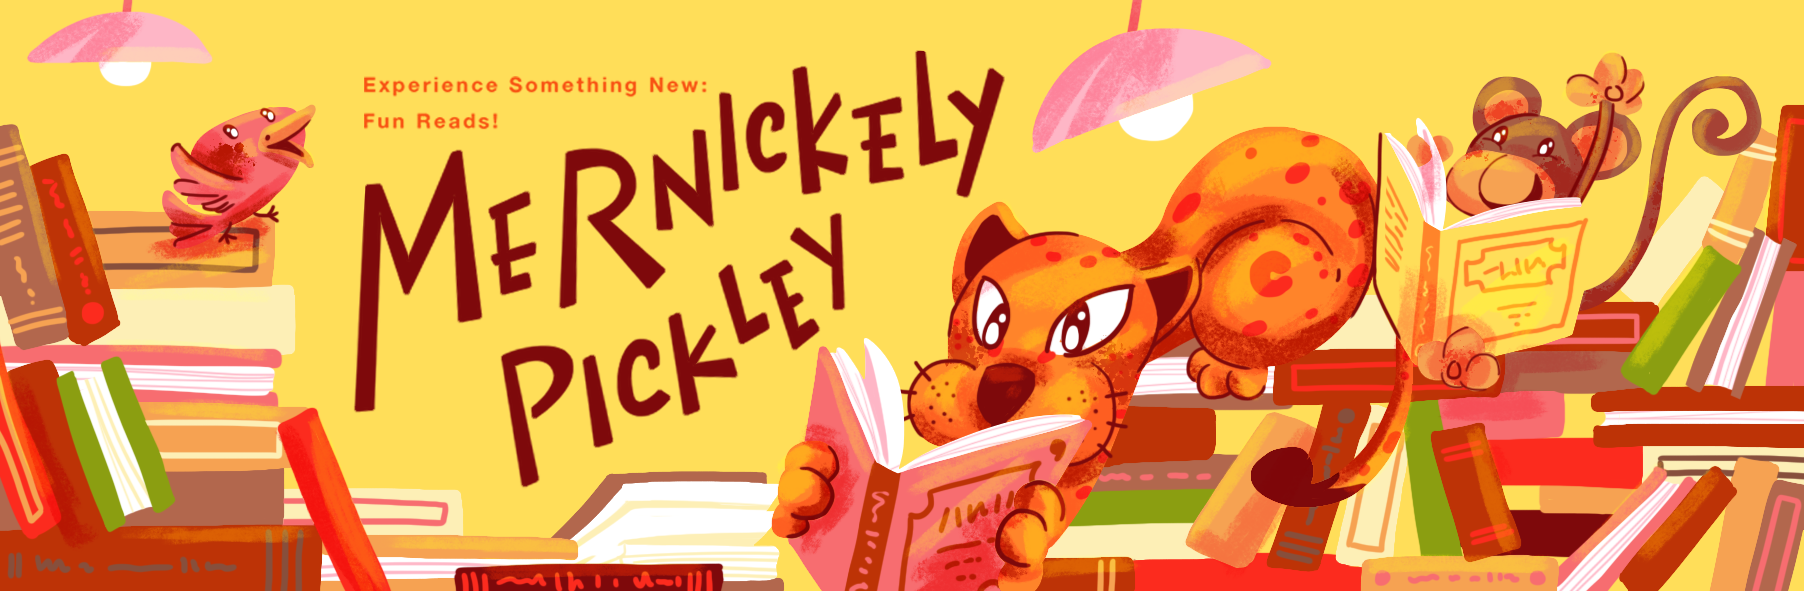 Mernickely Pickely Brings Cool Picture Stories and Educational Children’s Books for Babies, Toddlers and All Ages